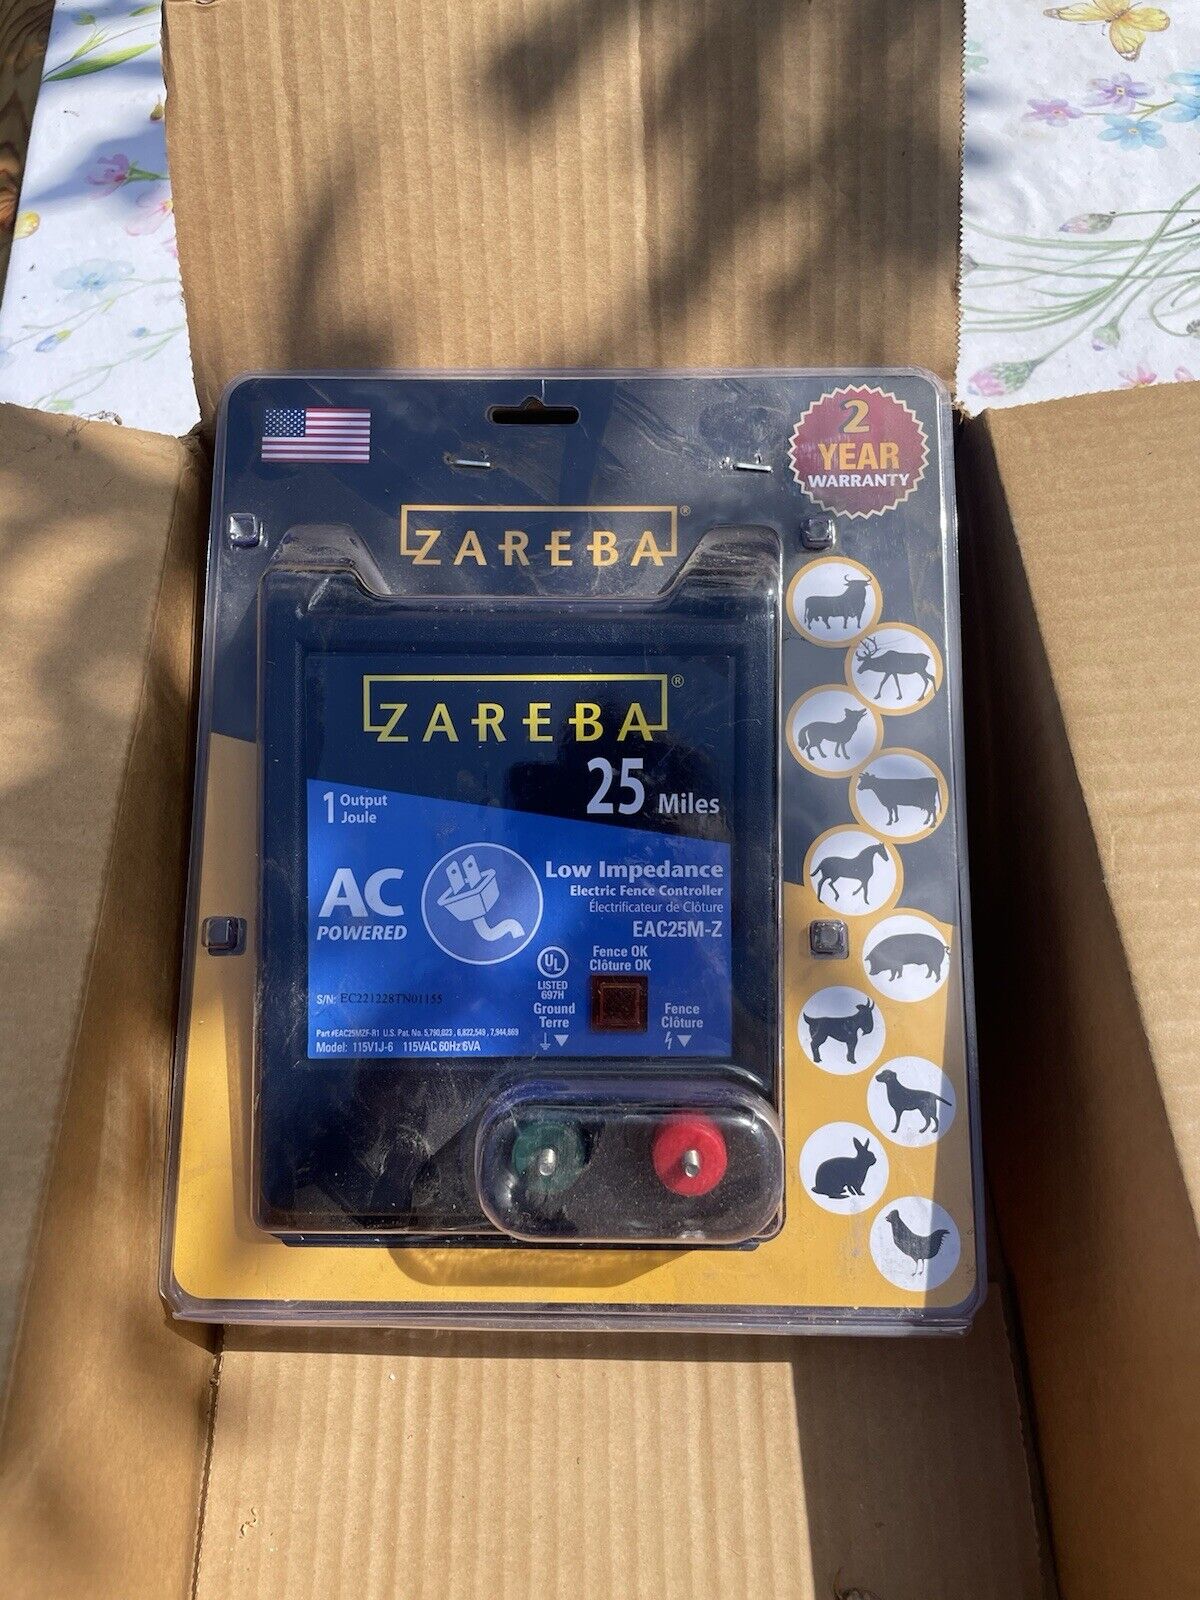 Zareba 25 Miles Low Impedance Electric Fence Charger Controller AC 115V1J-6